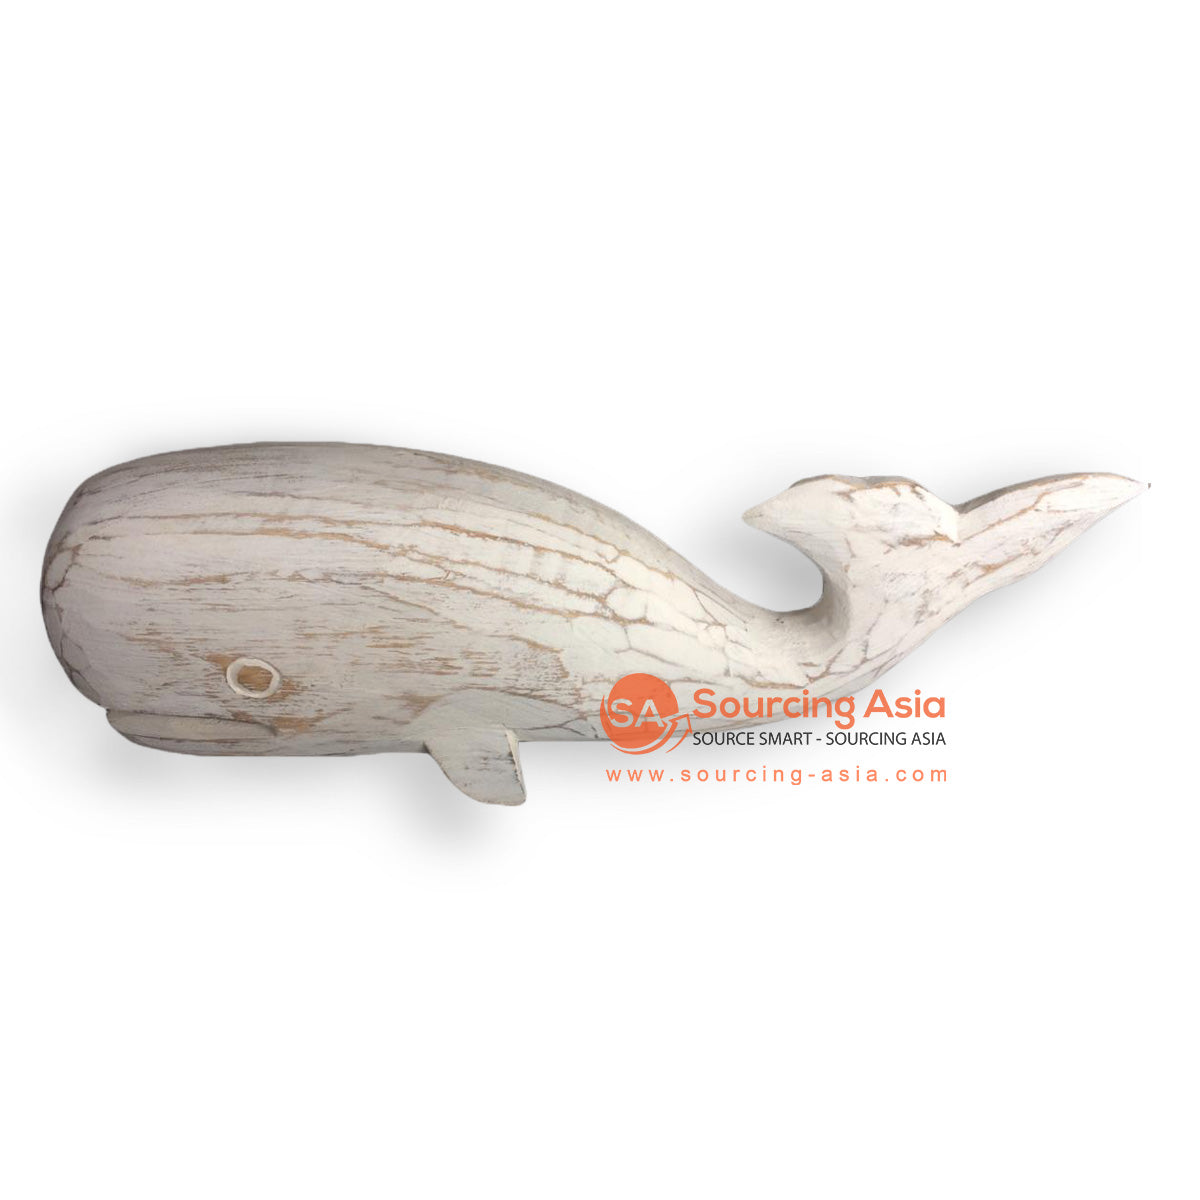 SLG023-1 WHITE WASH WOODEN WHALE DECORATION